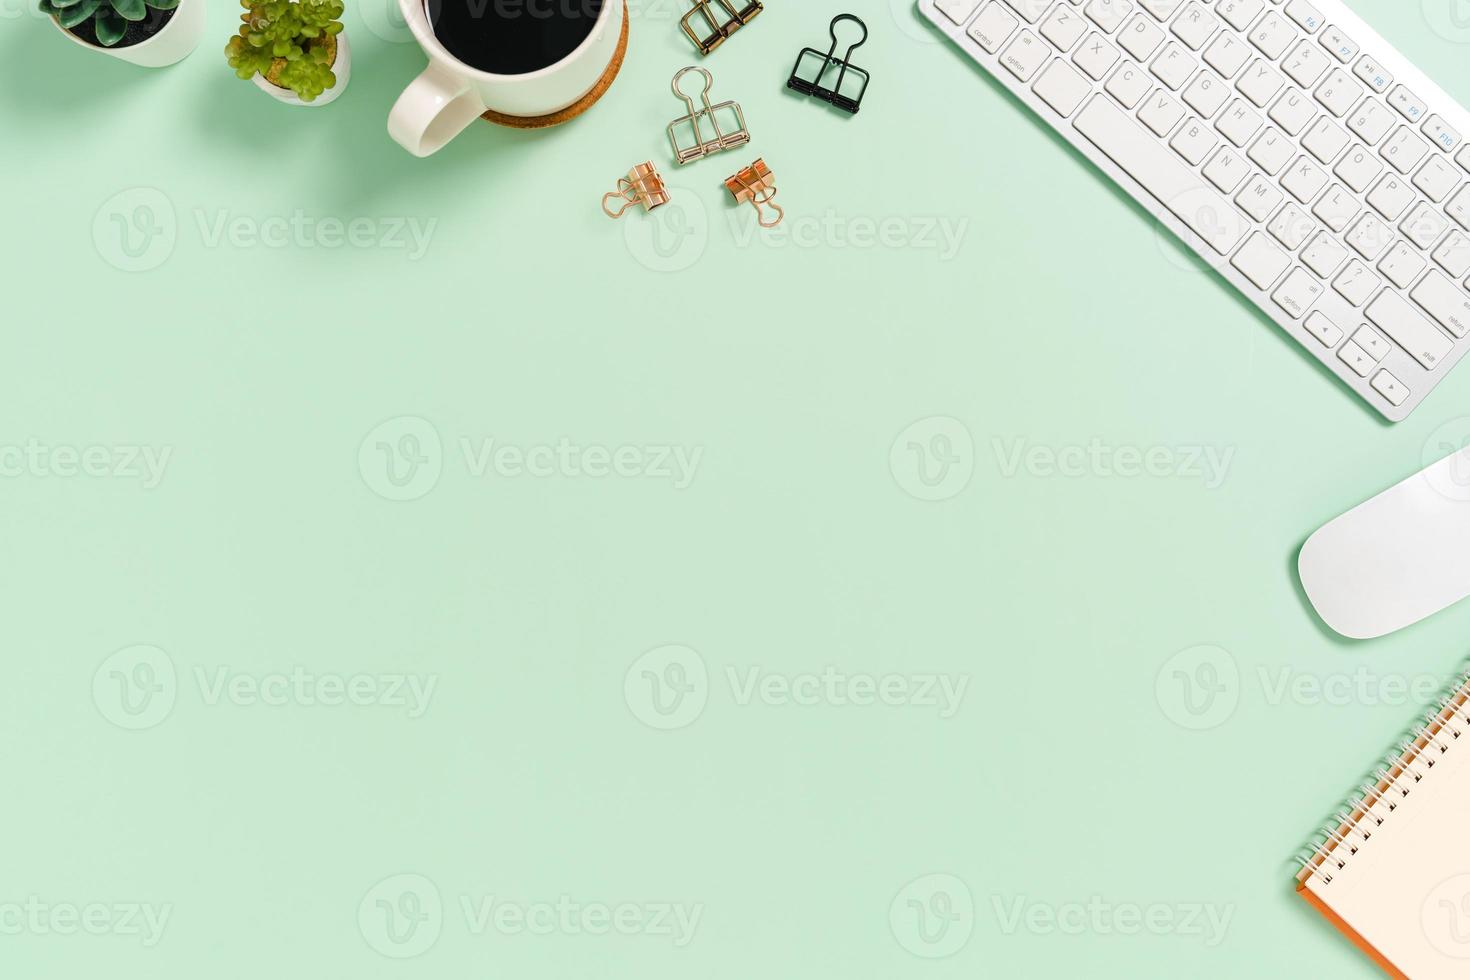 Minimal work space - Creative flat lay photo of workspace desk. Top view office desk with keyboard and mouse on pastel green color background. Top view with copy space, flat lay photography.